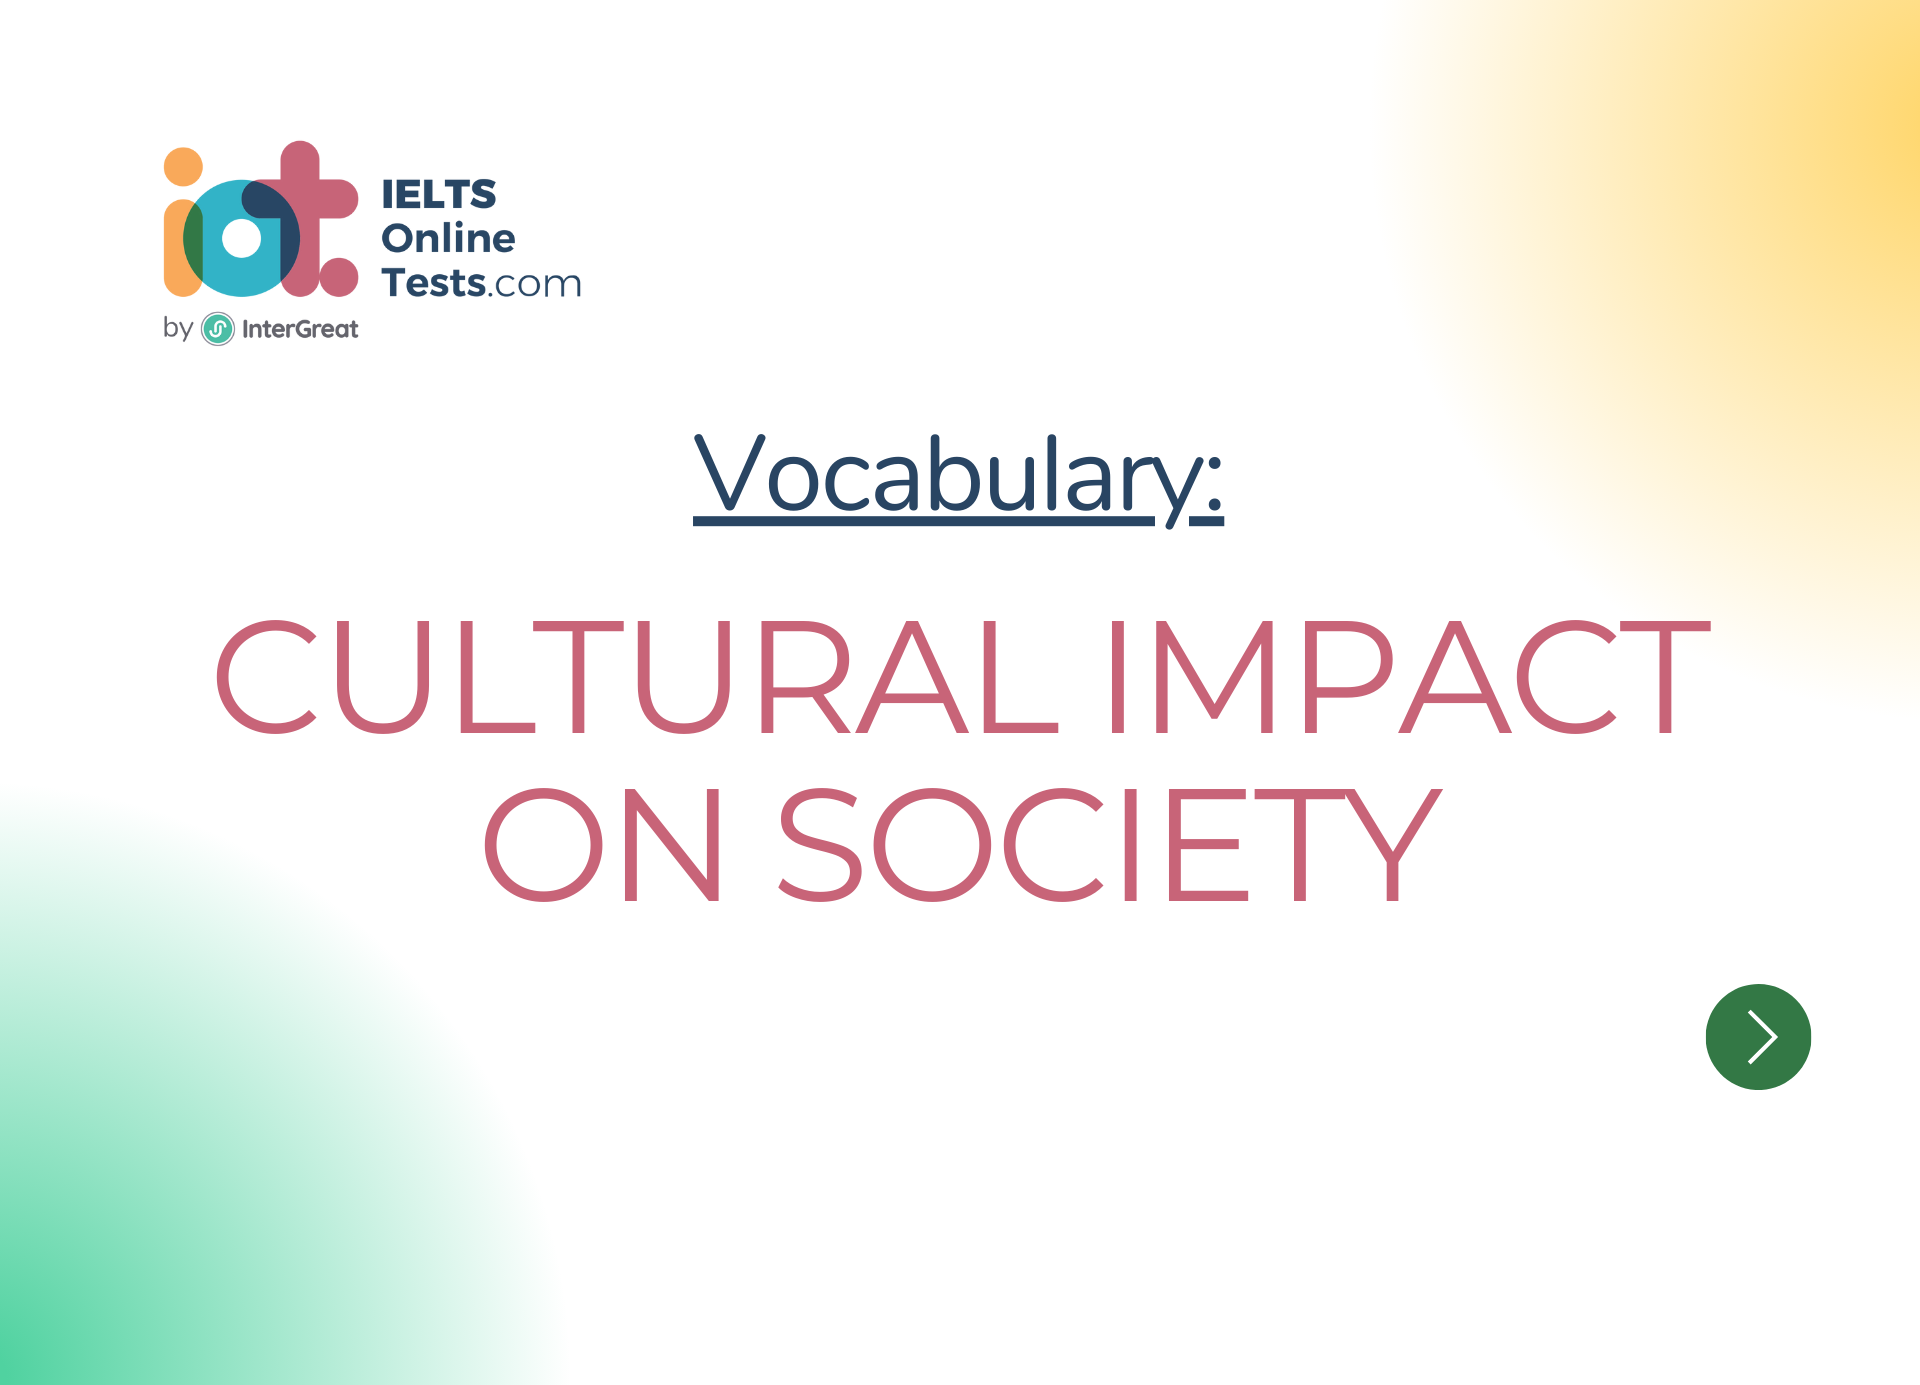 Cultural impact on society